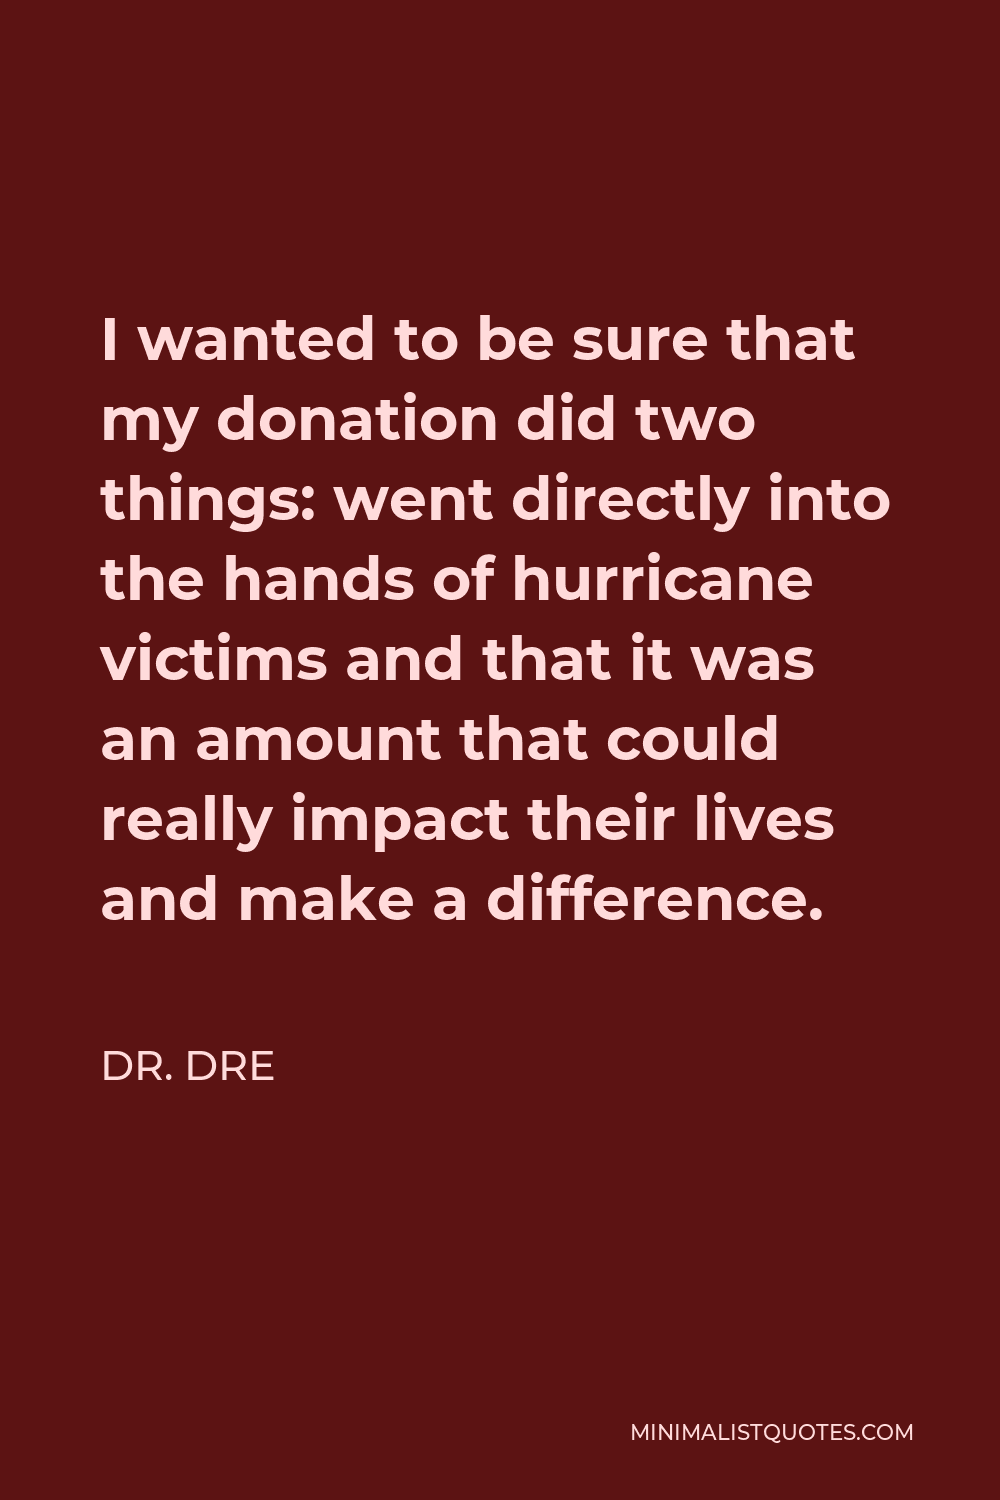 Dr. Dre Quote - I wanted to be sure that my donation did two things: went directly into the hands of hurricane victims and that it was an amount that could really impact their lives and make a difference.